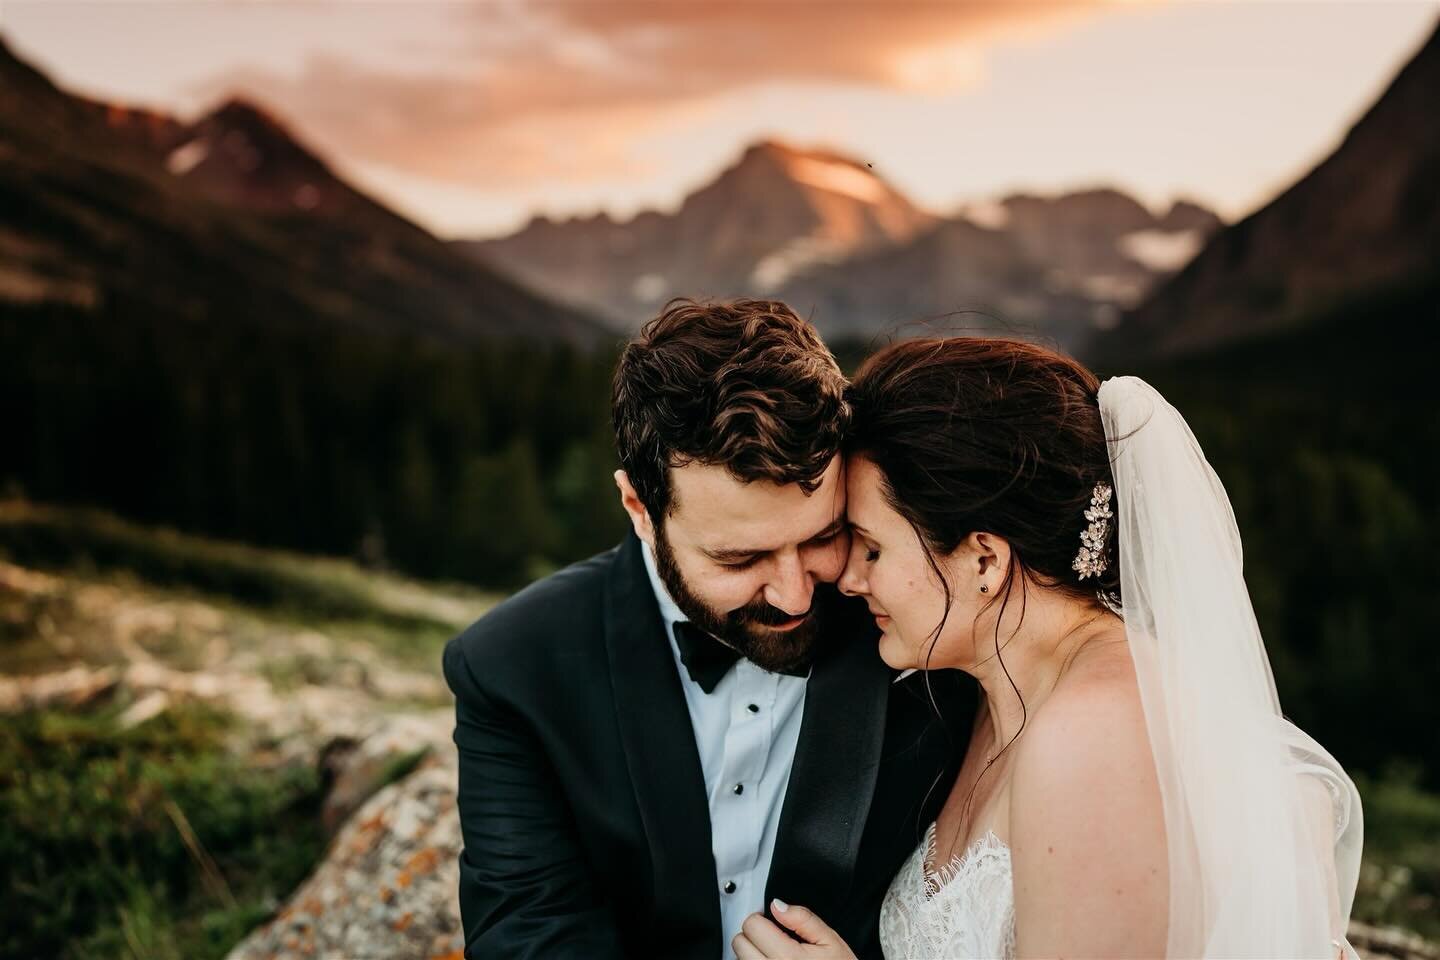 &ldquo;Whatever our souls are made of, his and mine are the same. &ldquo;
-Emily Bront&euml; 
#montanaelopement #montanaelopementphotographer #montanaelopementinspiration #glacier_national_park #glaciernationalparkmontana #glaciernationalpark #wander